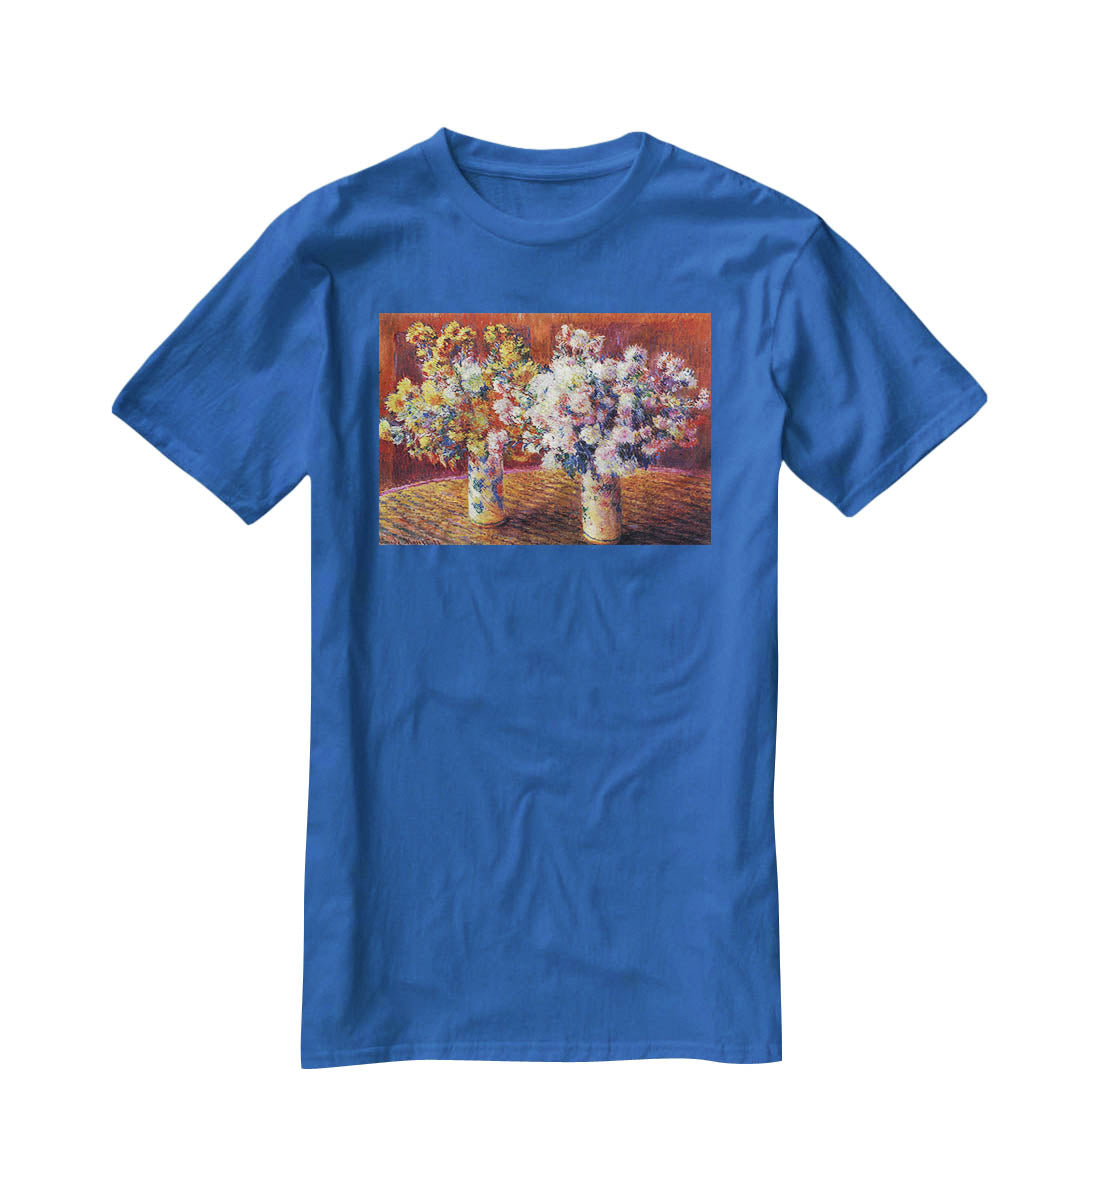 Two vases with Chrysanthemums by Monet T-Shirt - Canvas Art Rocks - 2